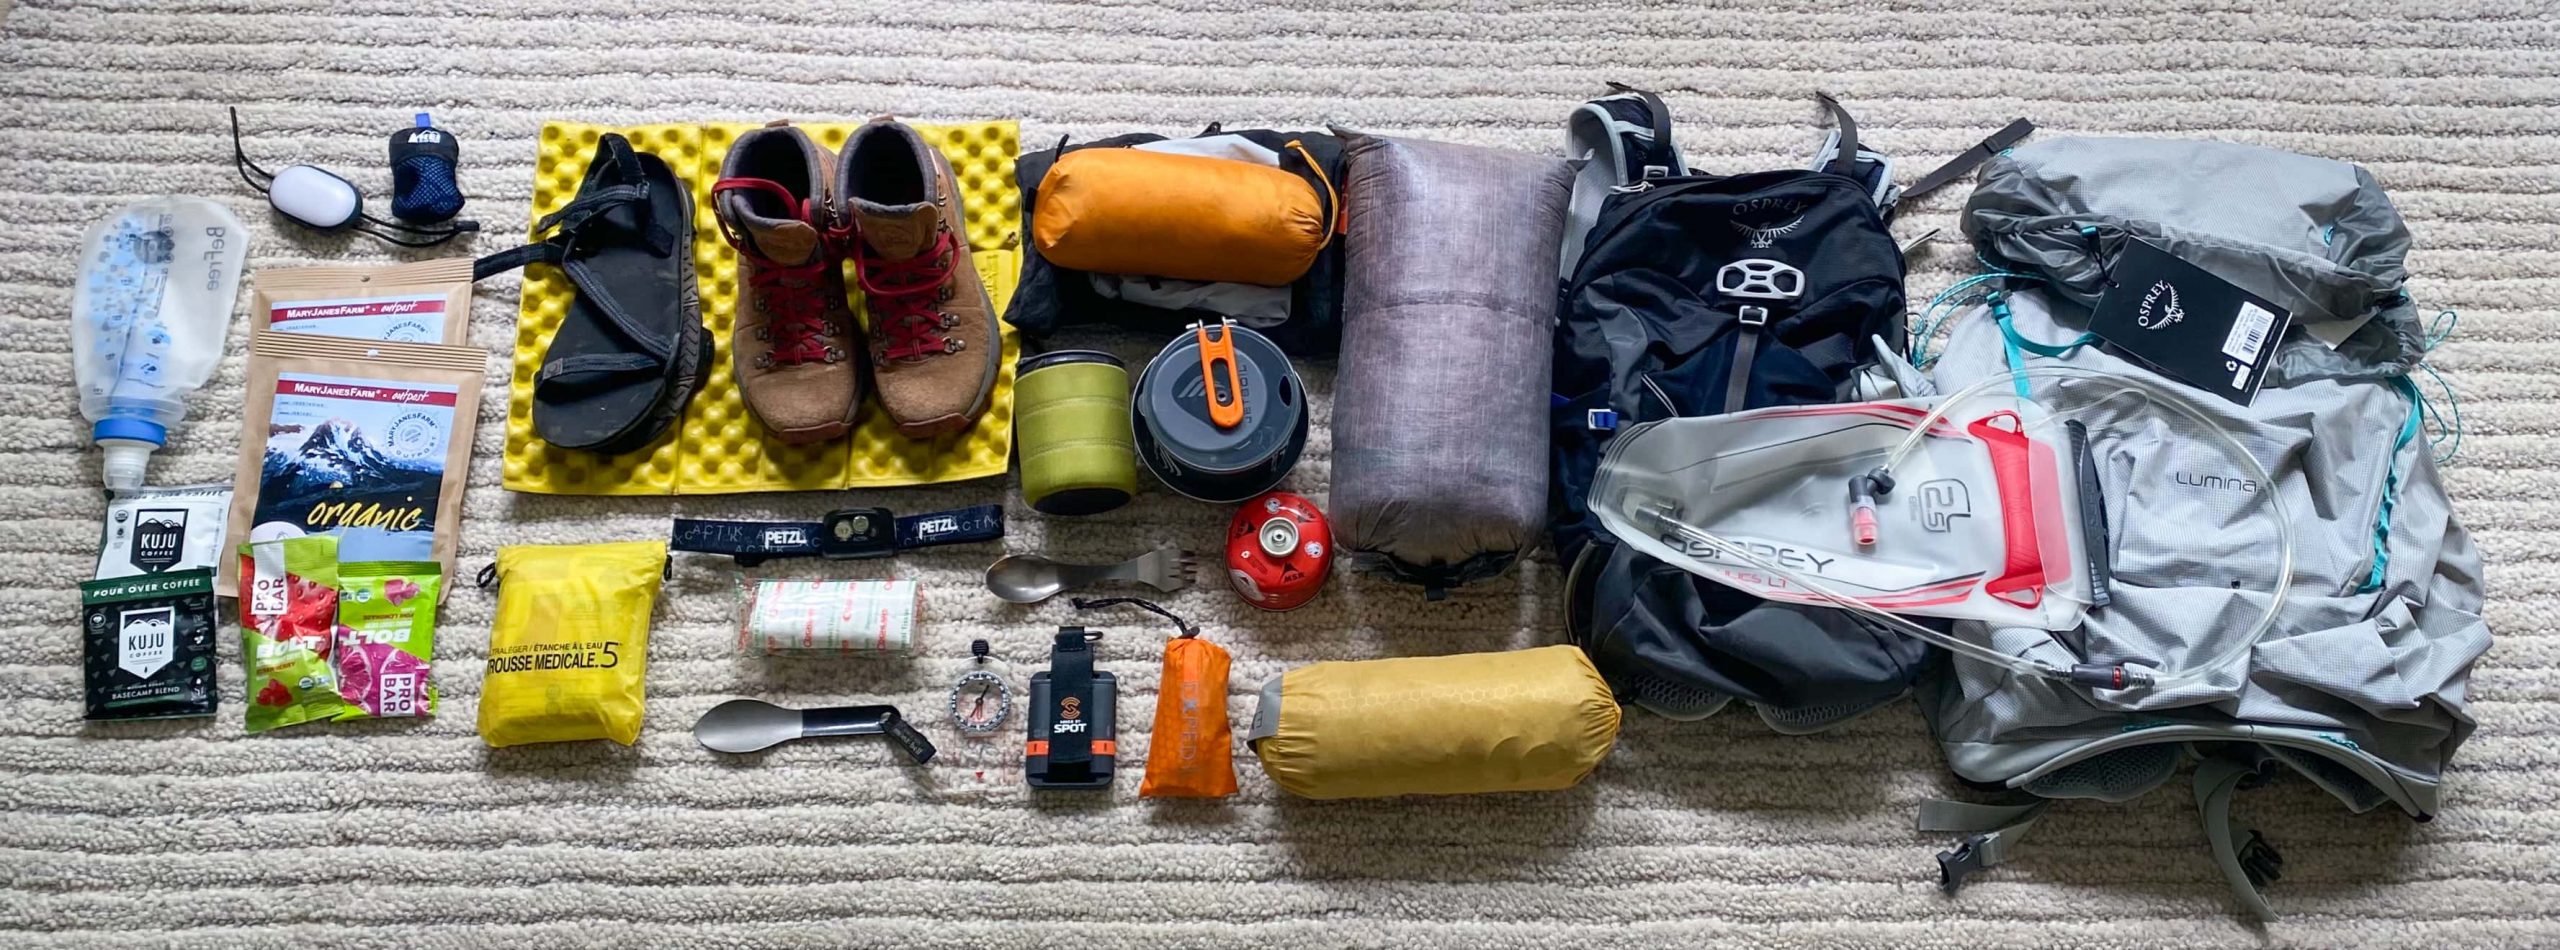 10 Easy Steps to Planning a One Week Thru Hike